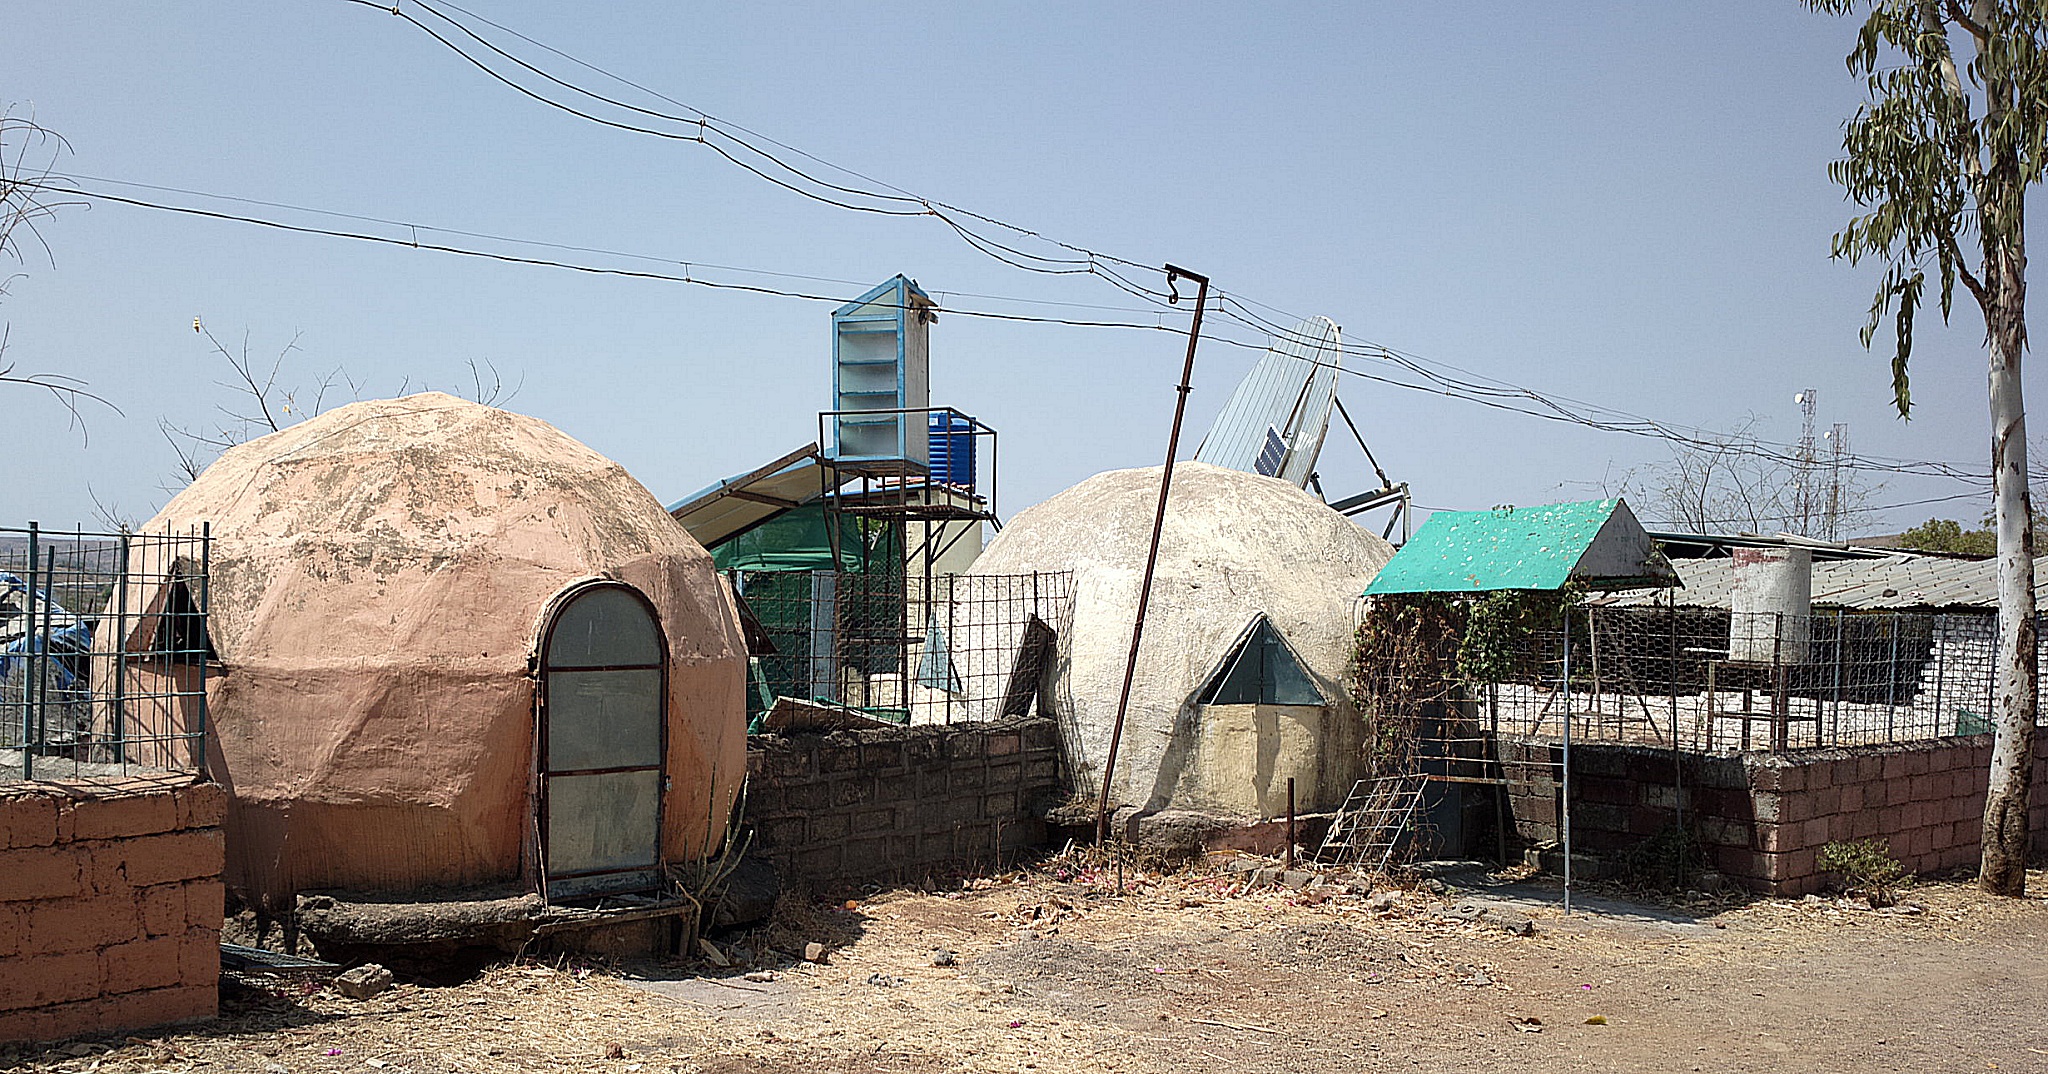 low-cost ferrocement geodesic dome-houses